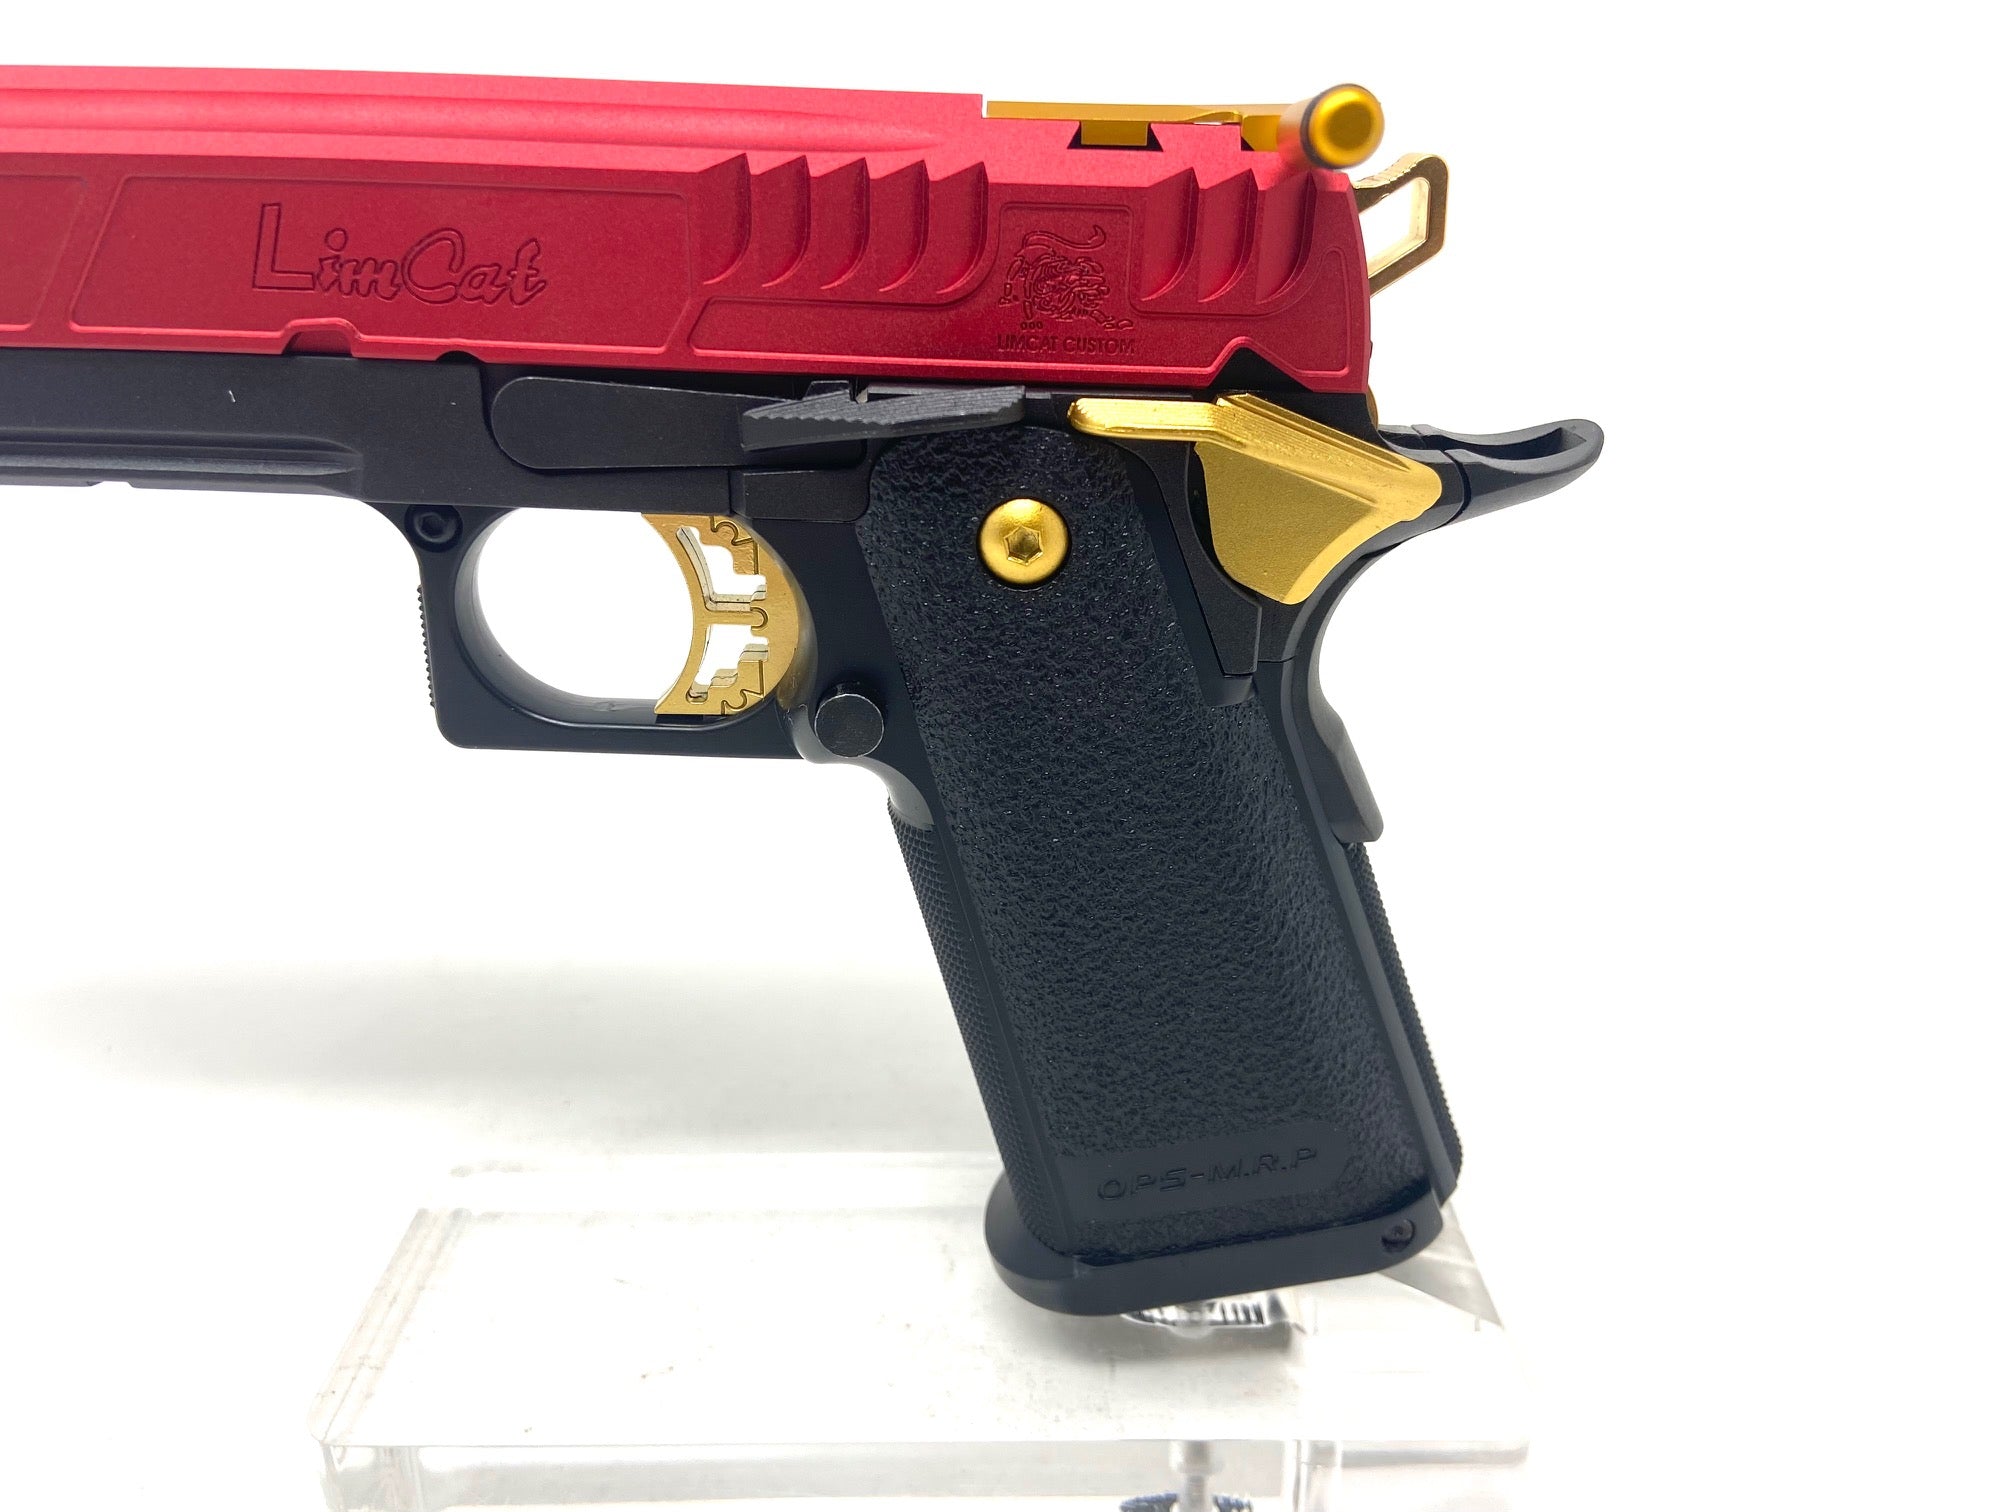 Get your one of a kind Custom Built Tokyo Marui Hicapa from SS Airsoft! We have the newest and sweetest selection on the East Coast! Come in or check us out online for our full selection! Let's Get It!!  Gold Flame includes:  Tokyo Marui 5.1 Gold match Airsoft masterpiece limcat Speedcat Red slide  Threaded 5.1 LA capa outer barrel  CowCow A01 Thread adapter  120% recoil spring  AIP charging handle  CowCow buffer kit